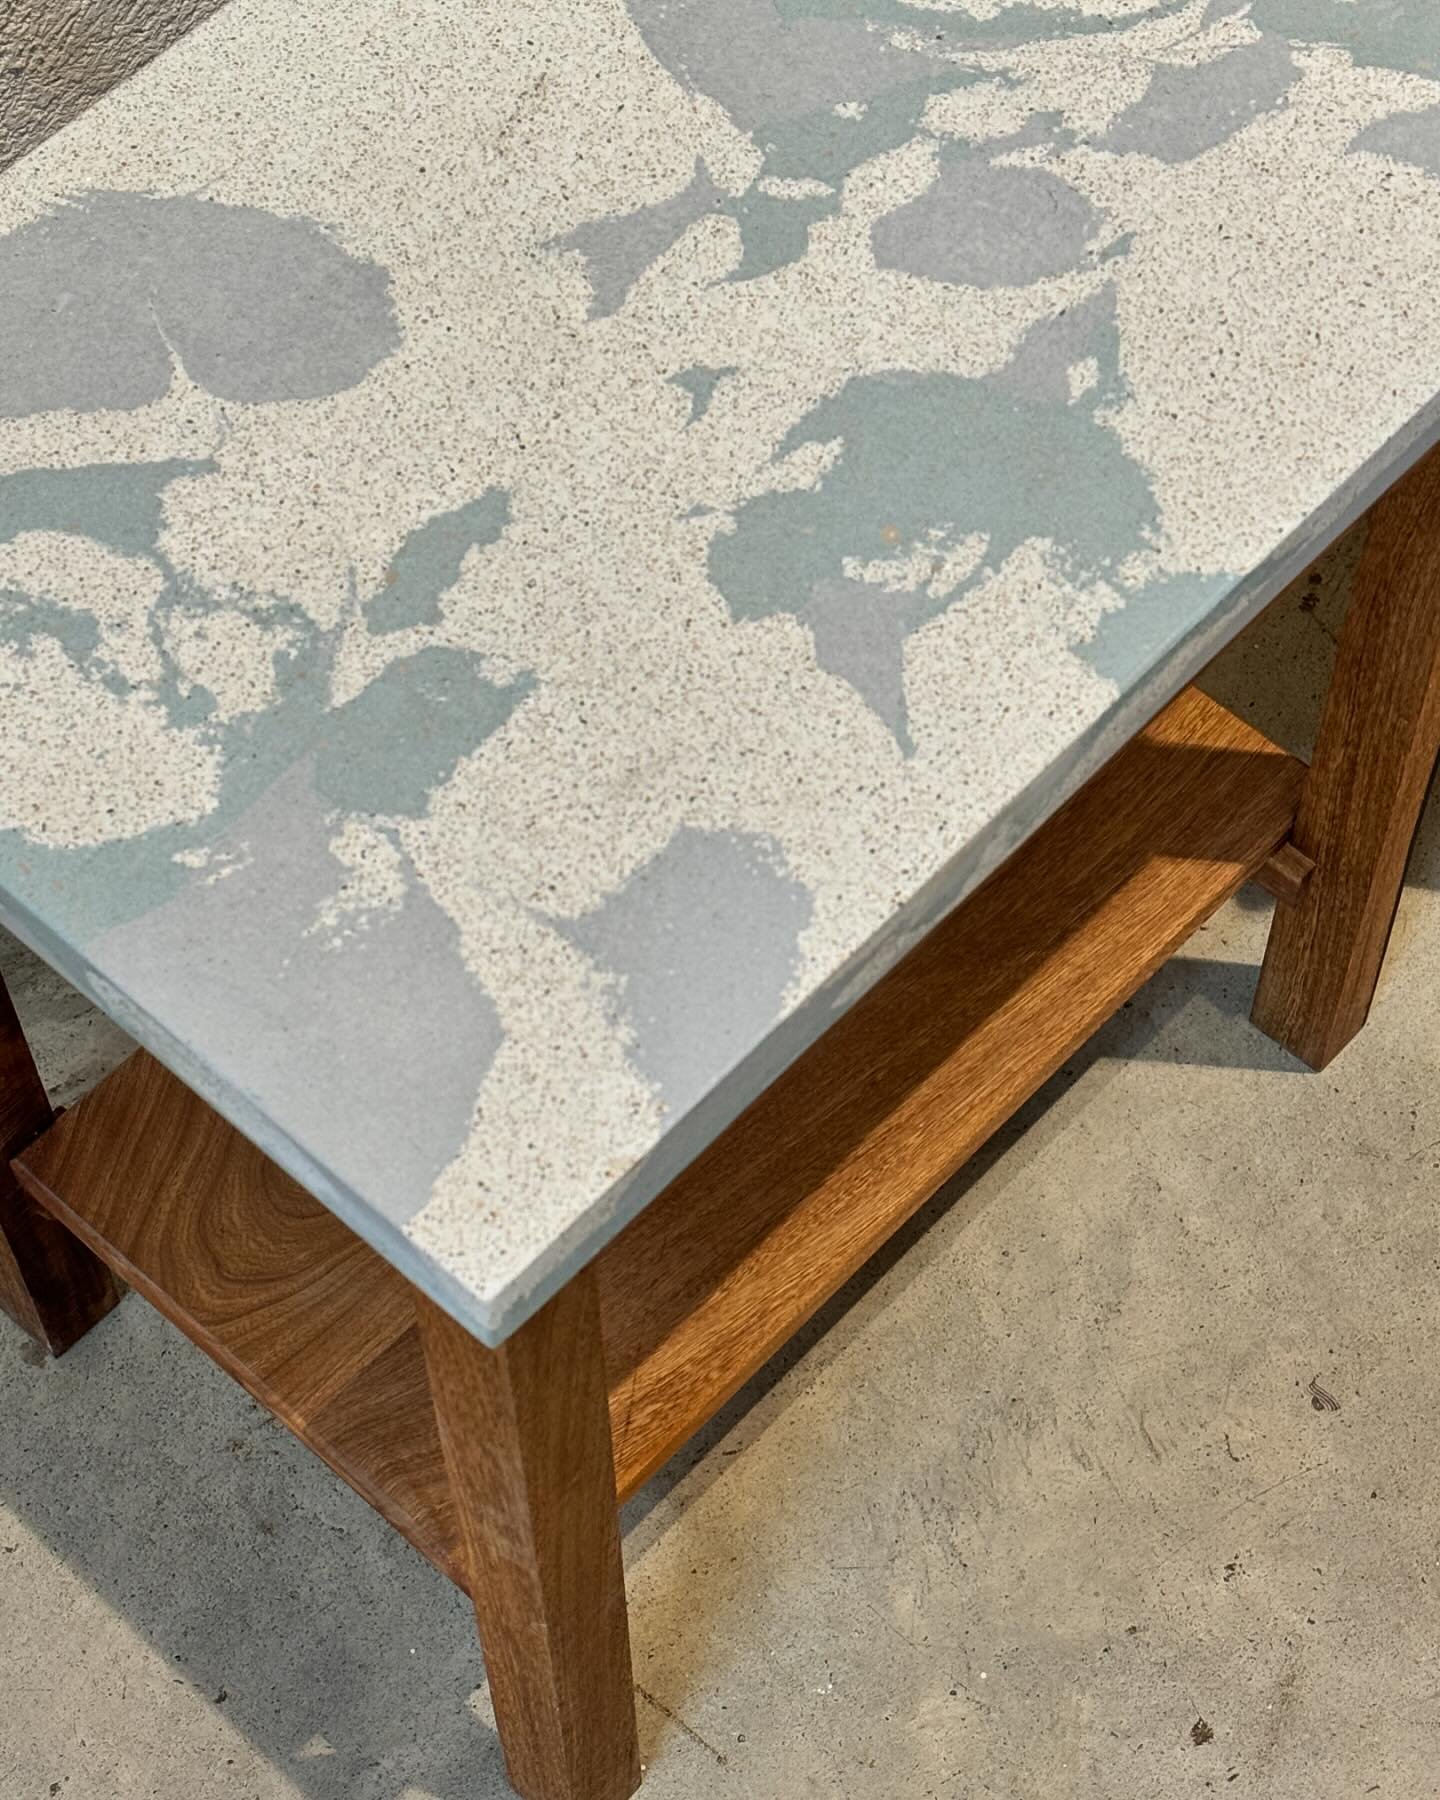 Made in Baja Nightstands, on display and for sale through May at our pop-up @thecoopbaja at Oystera in Todos Santos. Sold in pairs, made of rosa morada in Pescadero and terrazzo in Tijuana, the energy of lifelong friends imbues your home with the bes